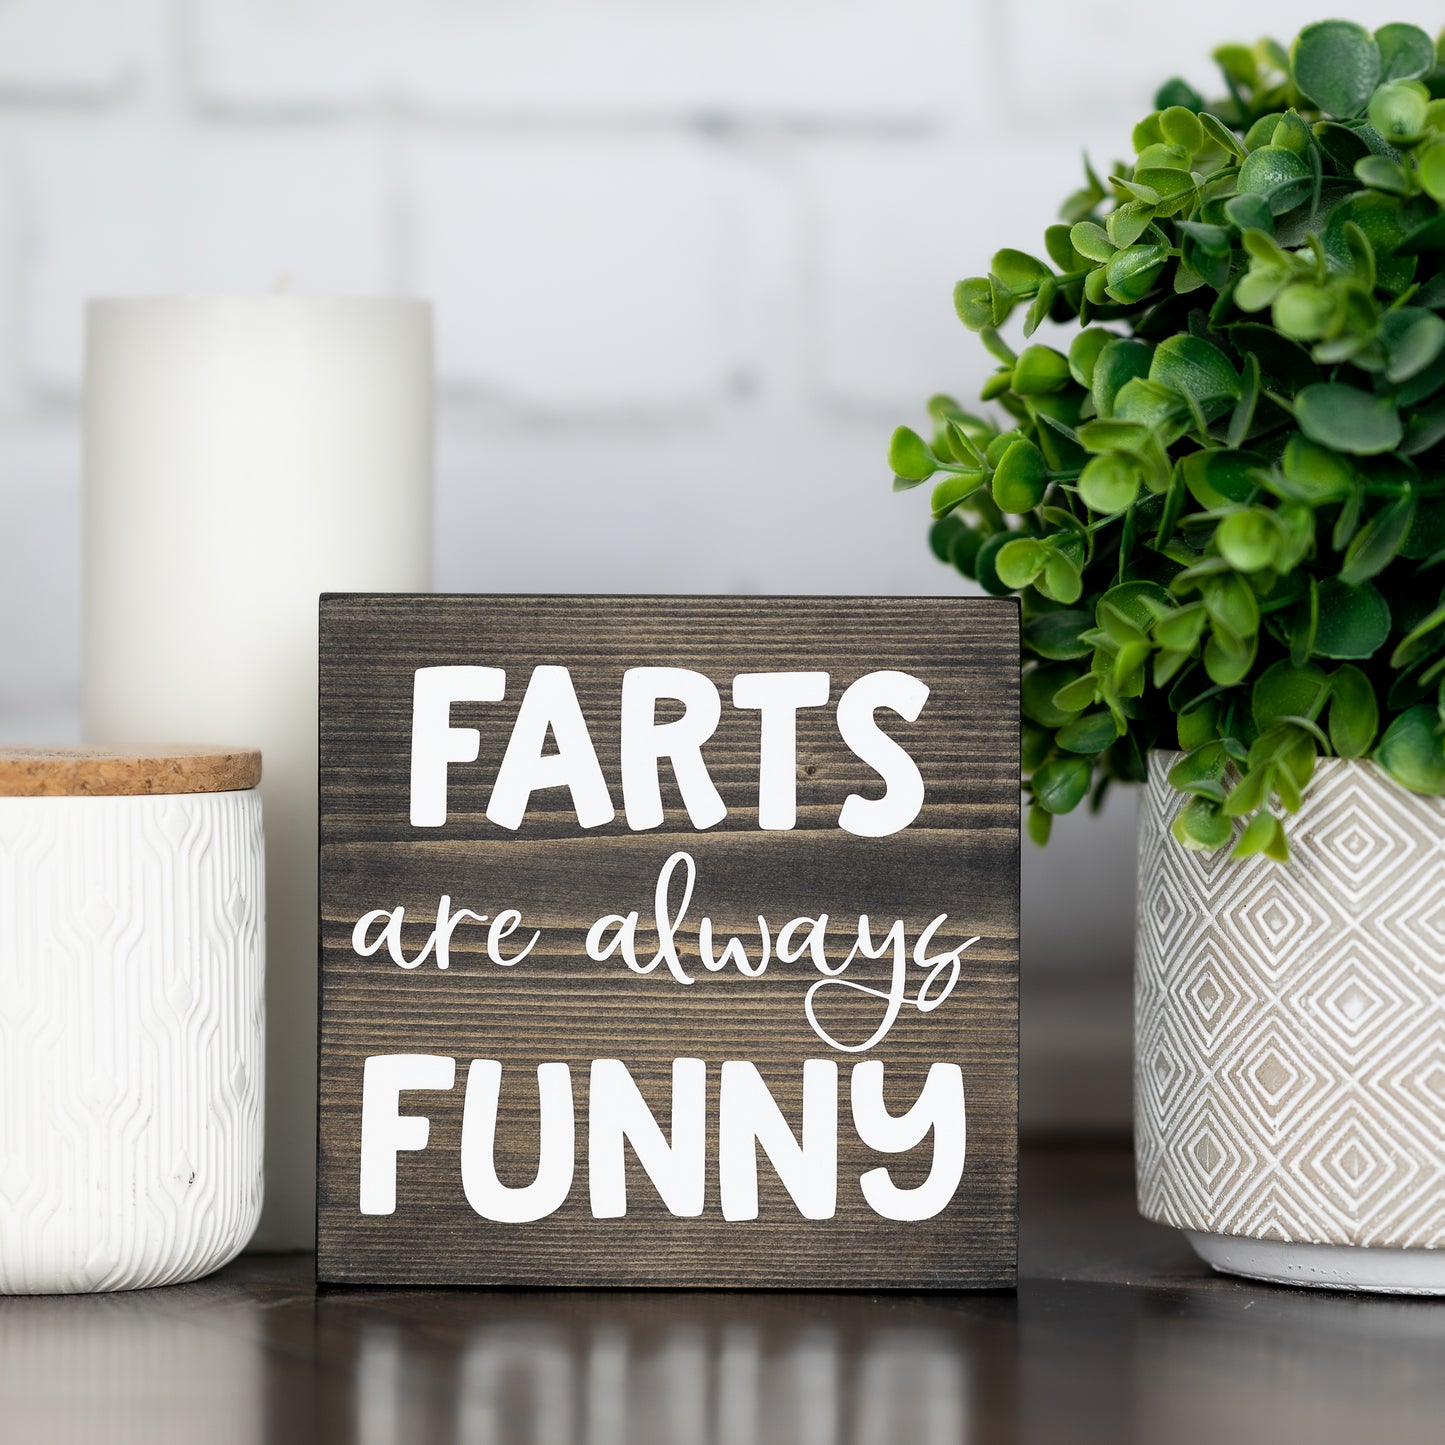 farts are always funny ~ wood sign block